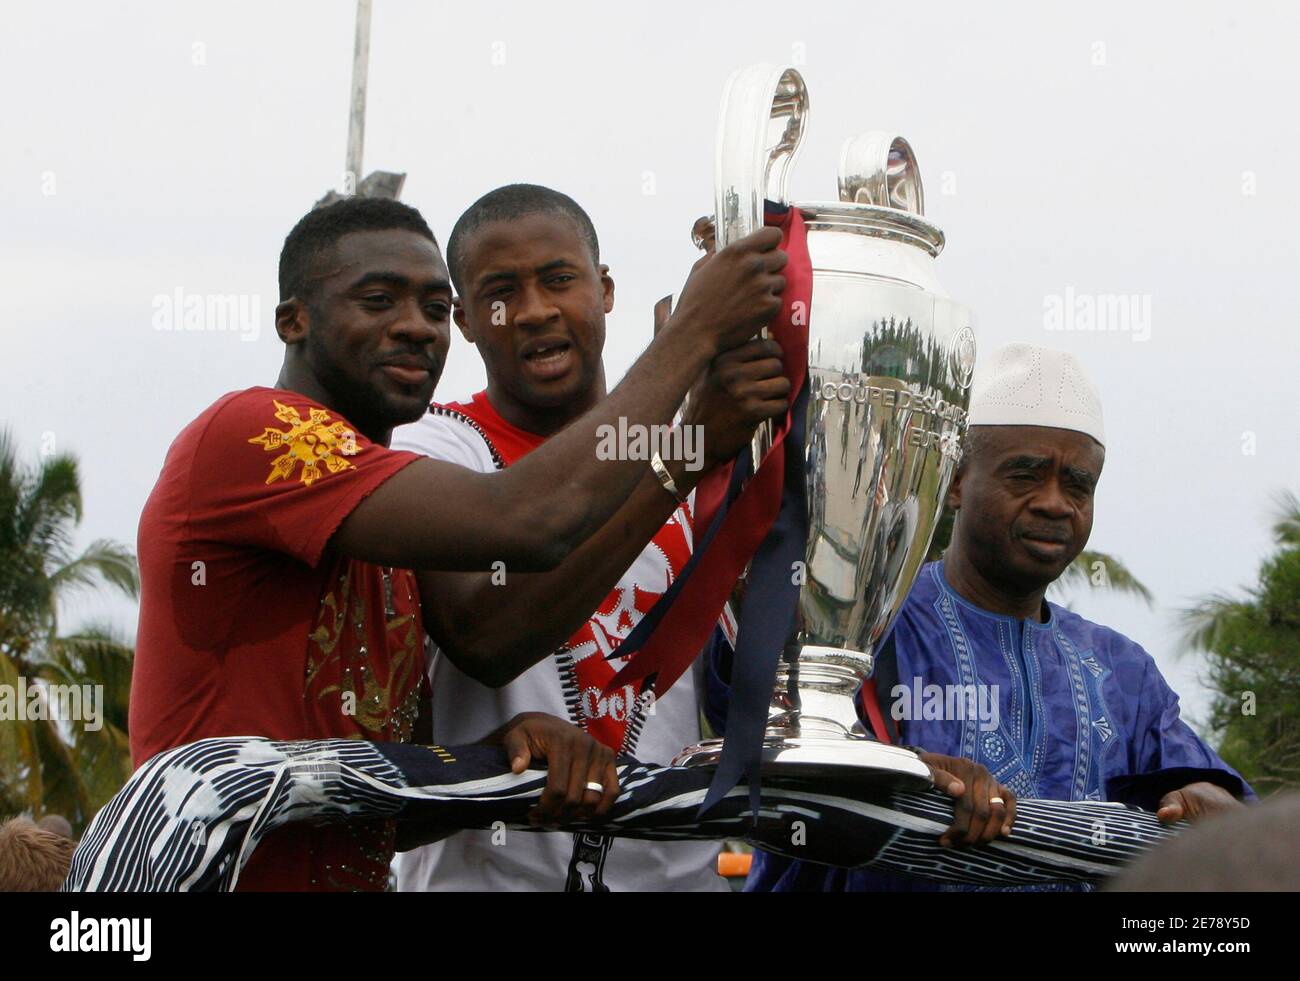 Barcelona's Yaya Toure (C) of the Ivory Coast holds the UEFA Champions  League trophy with his brother Arsenal's Kolo Toure in Abidjan June 1,  2009. At right is their father Mory Toure.